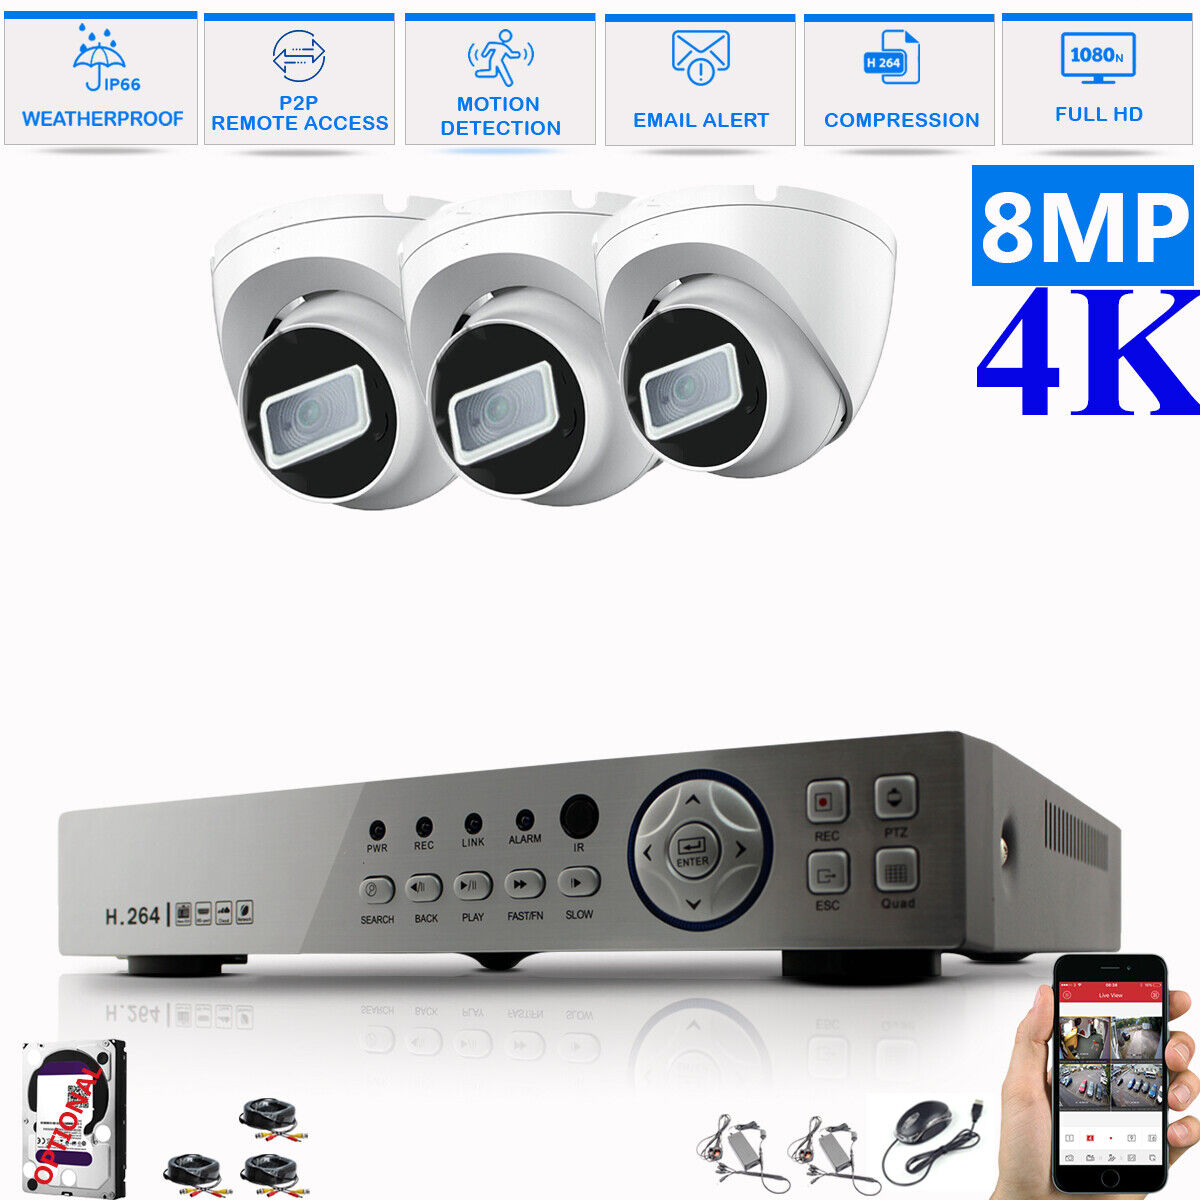 8MP CCTV 4K KIT DVR SYSTEM OUTDOOR ULTRA HD HOME CAMERA SECURITY KIT NIGHTVISION 4CH DVR 3xCameras (white) 1TB HDD